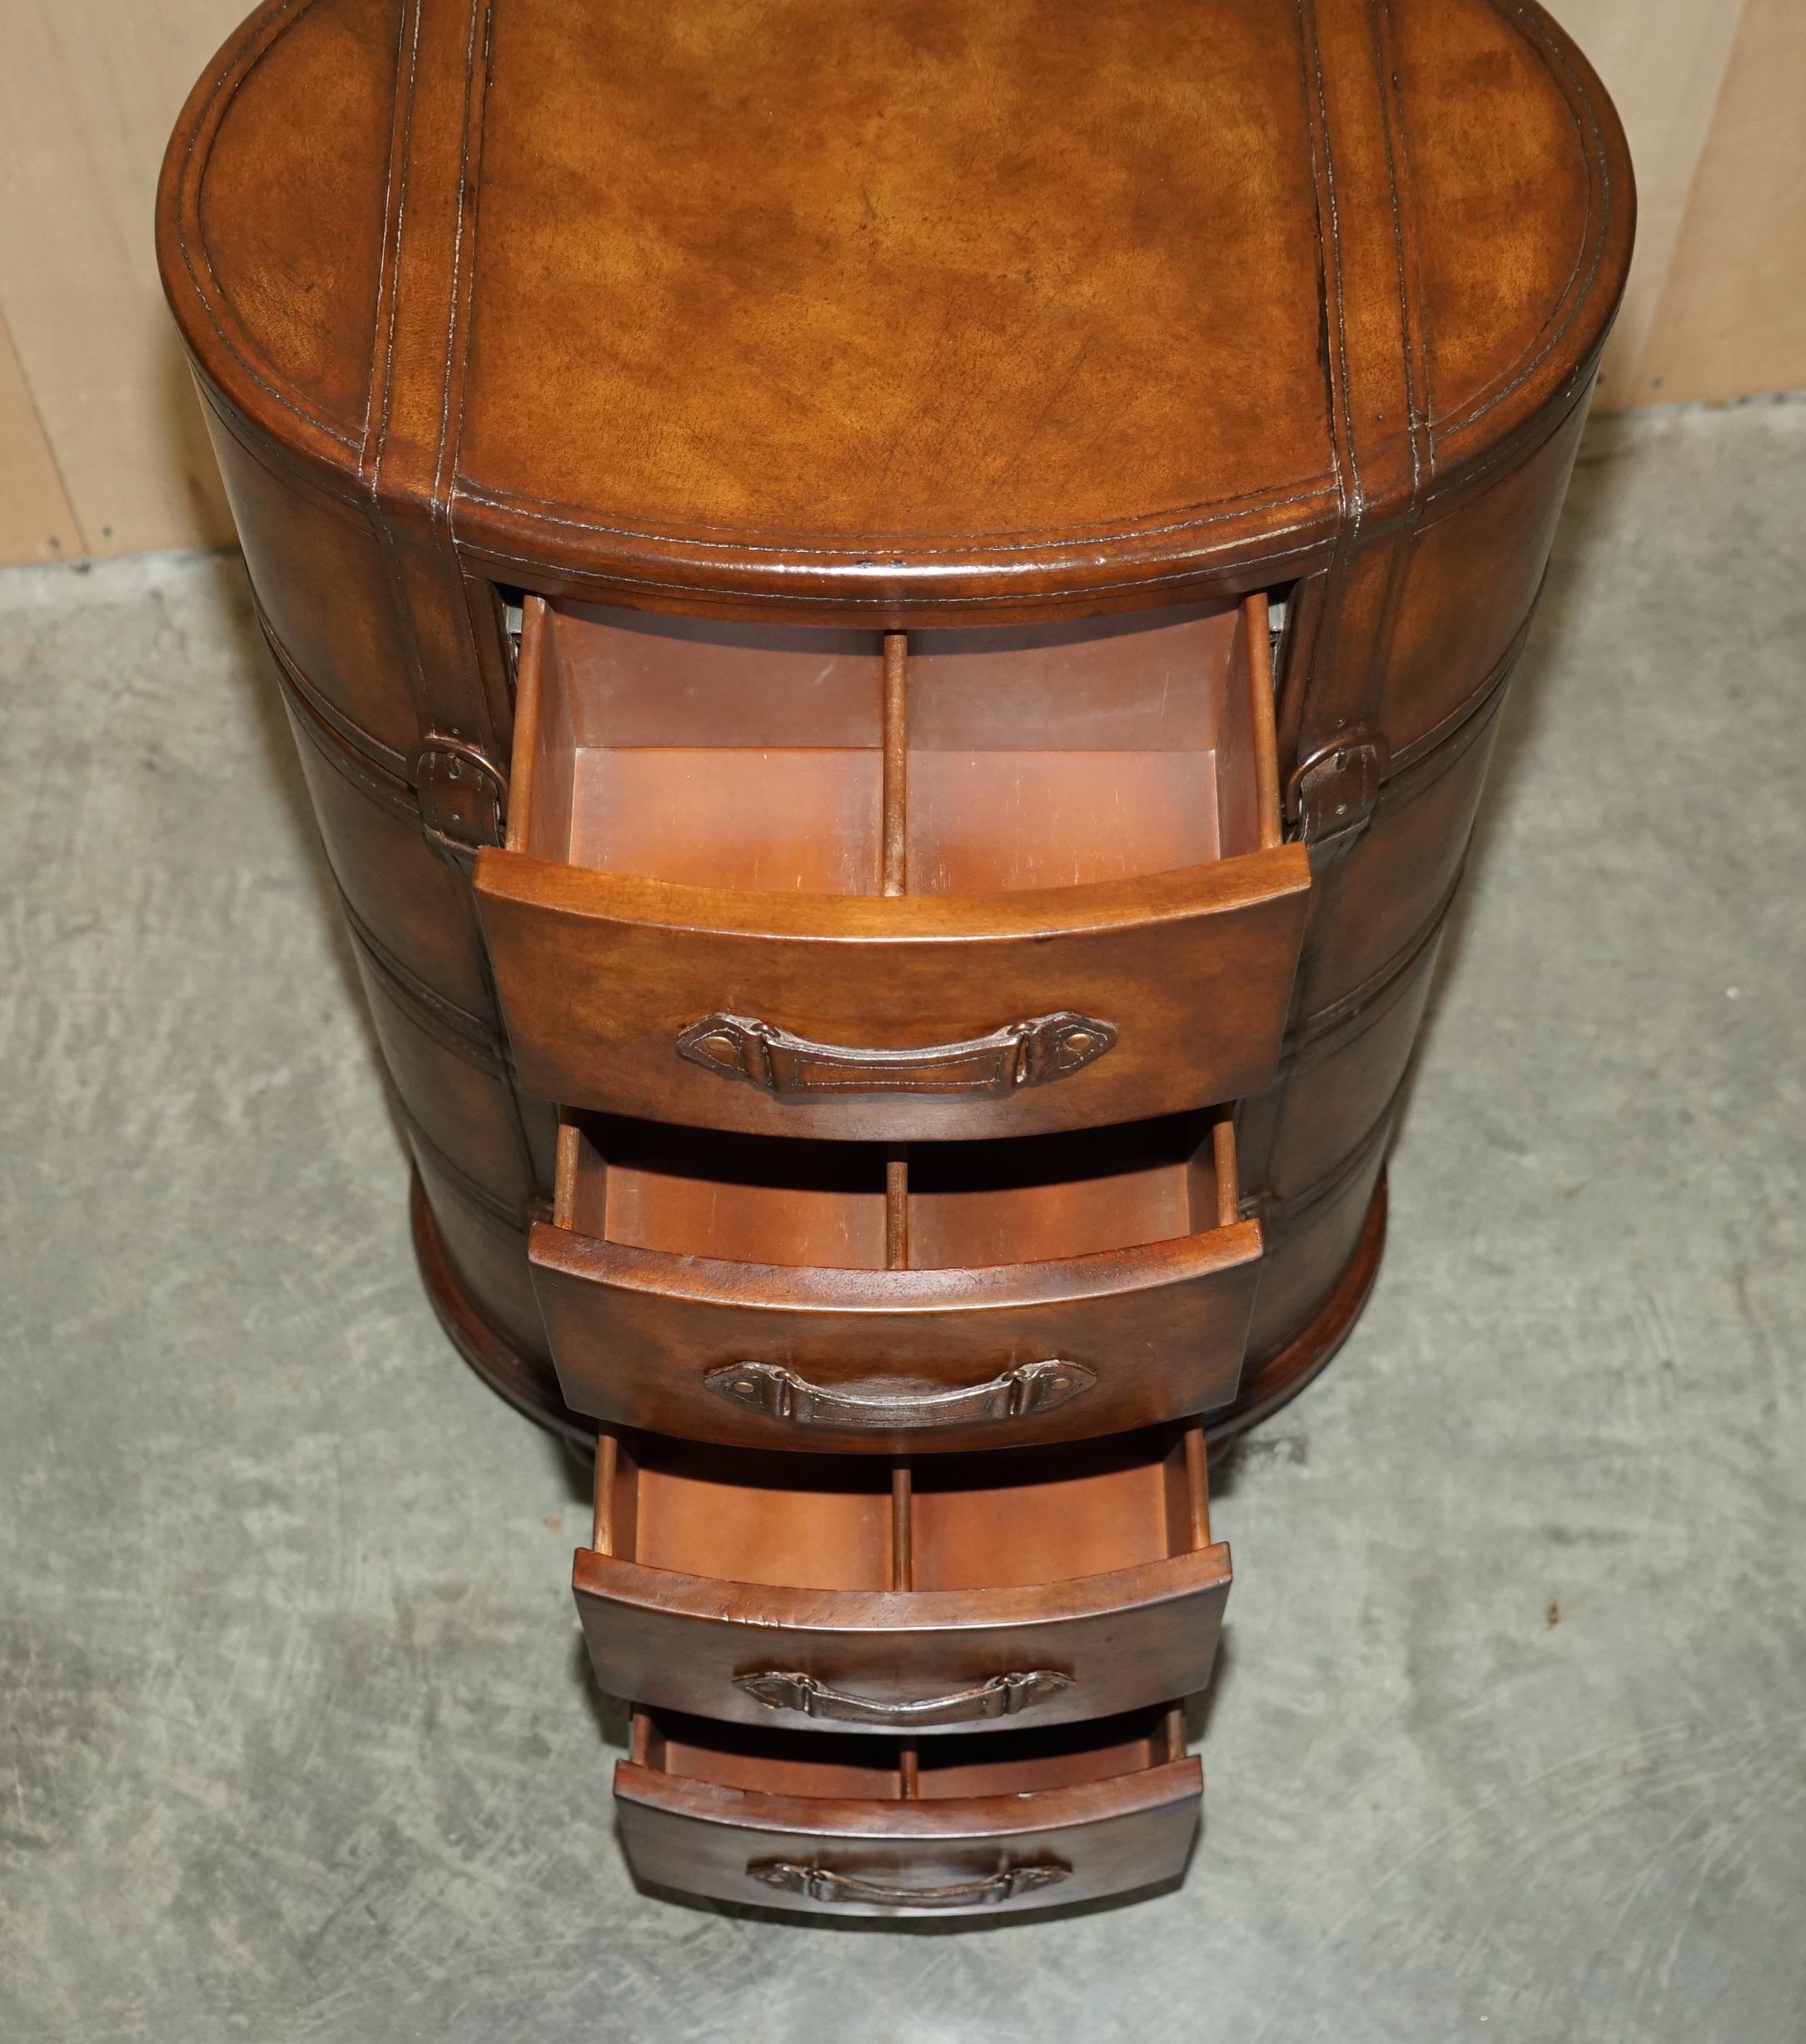 Brown Leather Oval Tallboy Chest of Drawers with Luggage Style Straps or Belts 10